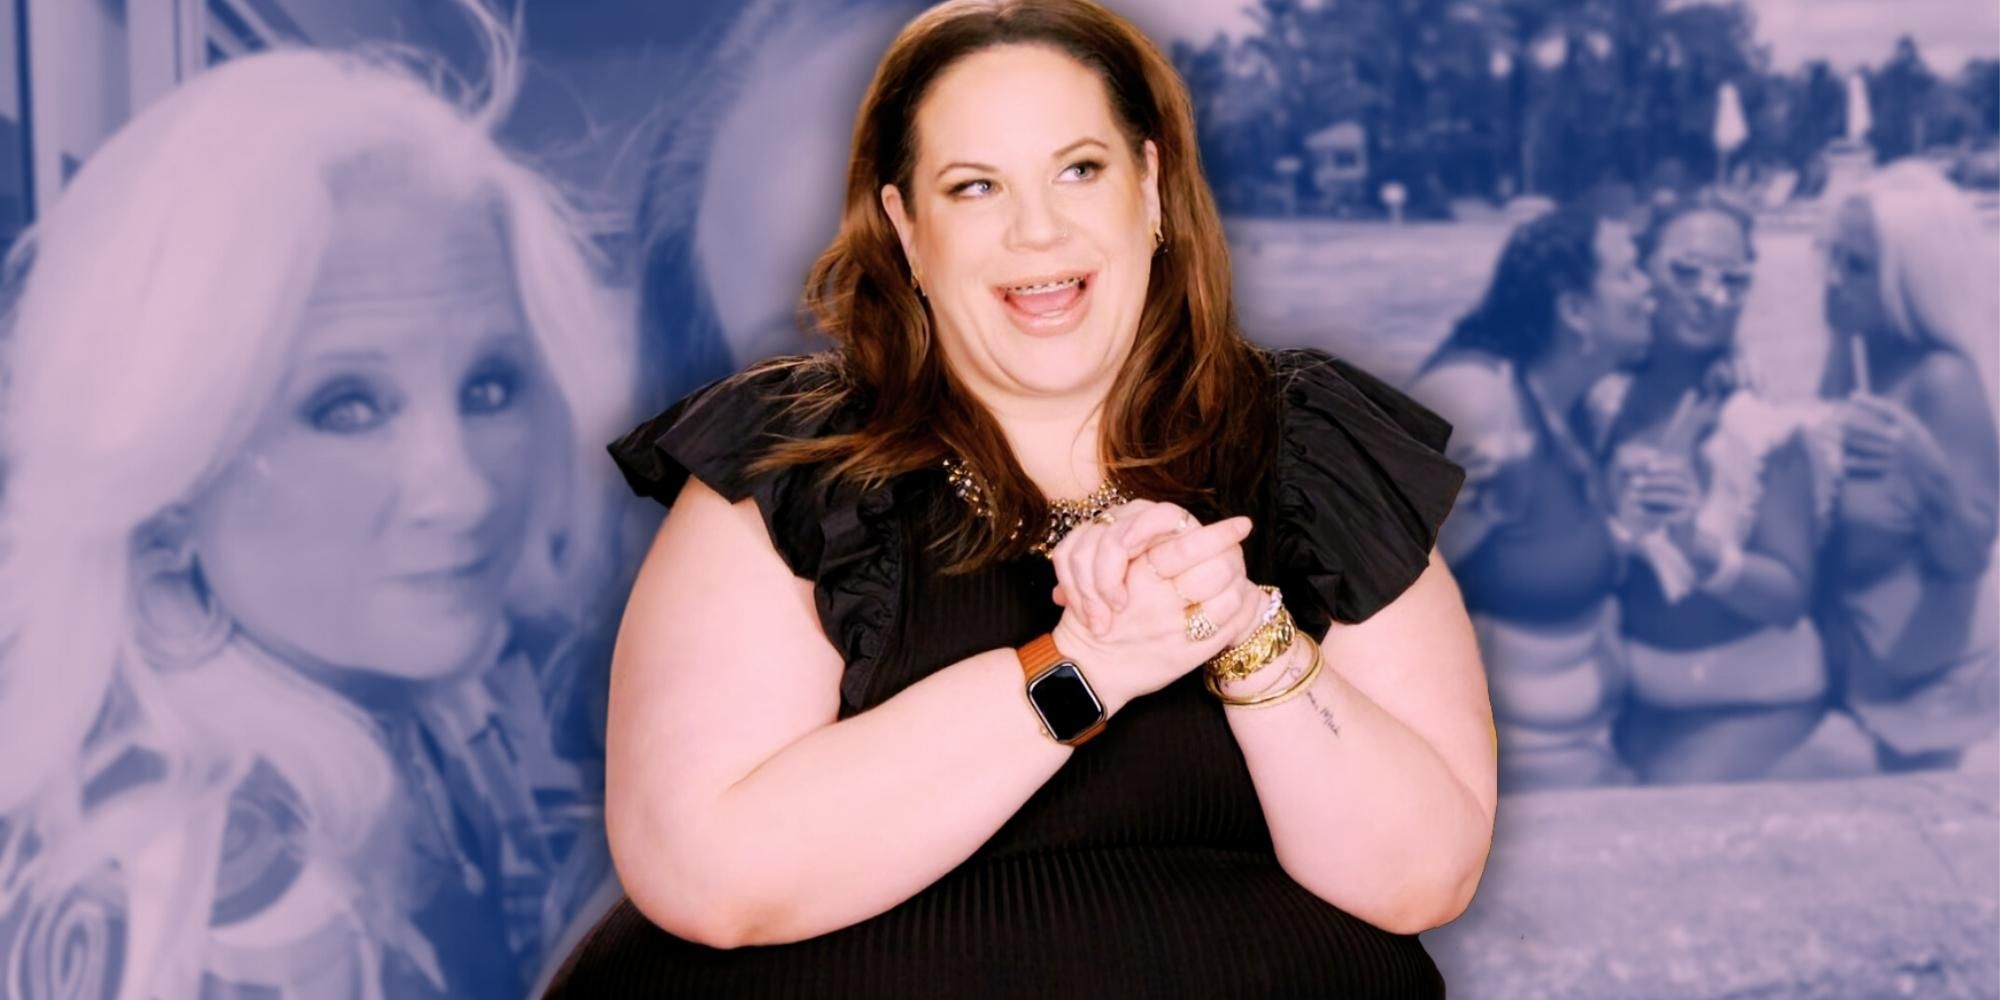 Whitney Way Thore from MBFFL with a mystery woman background